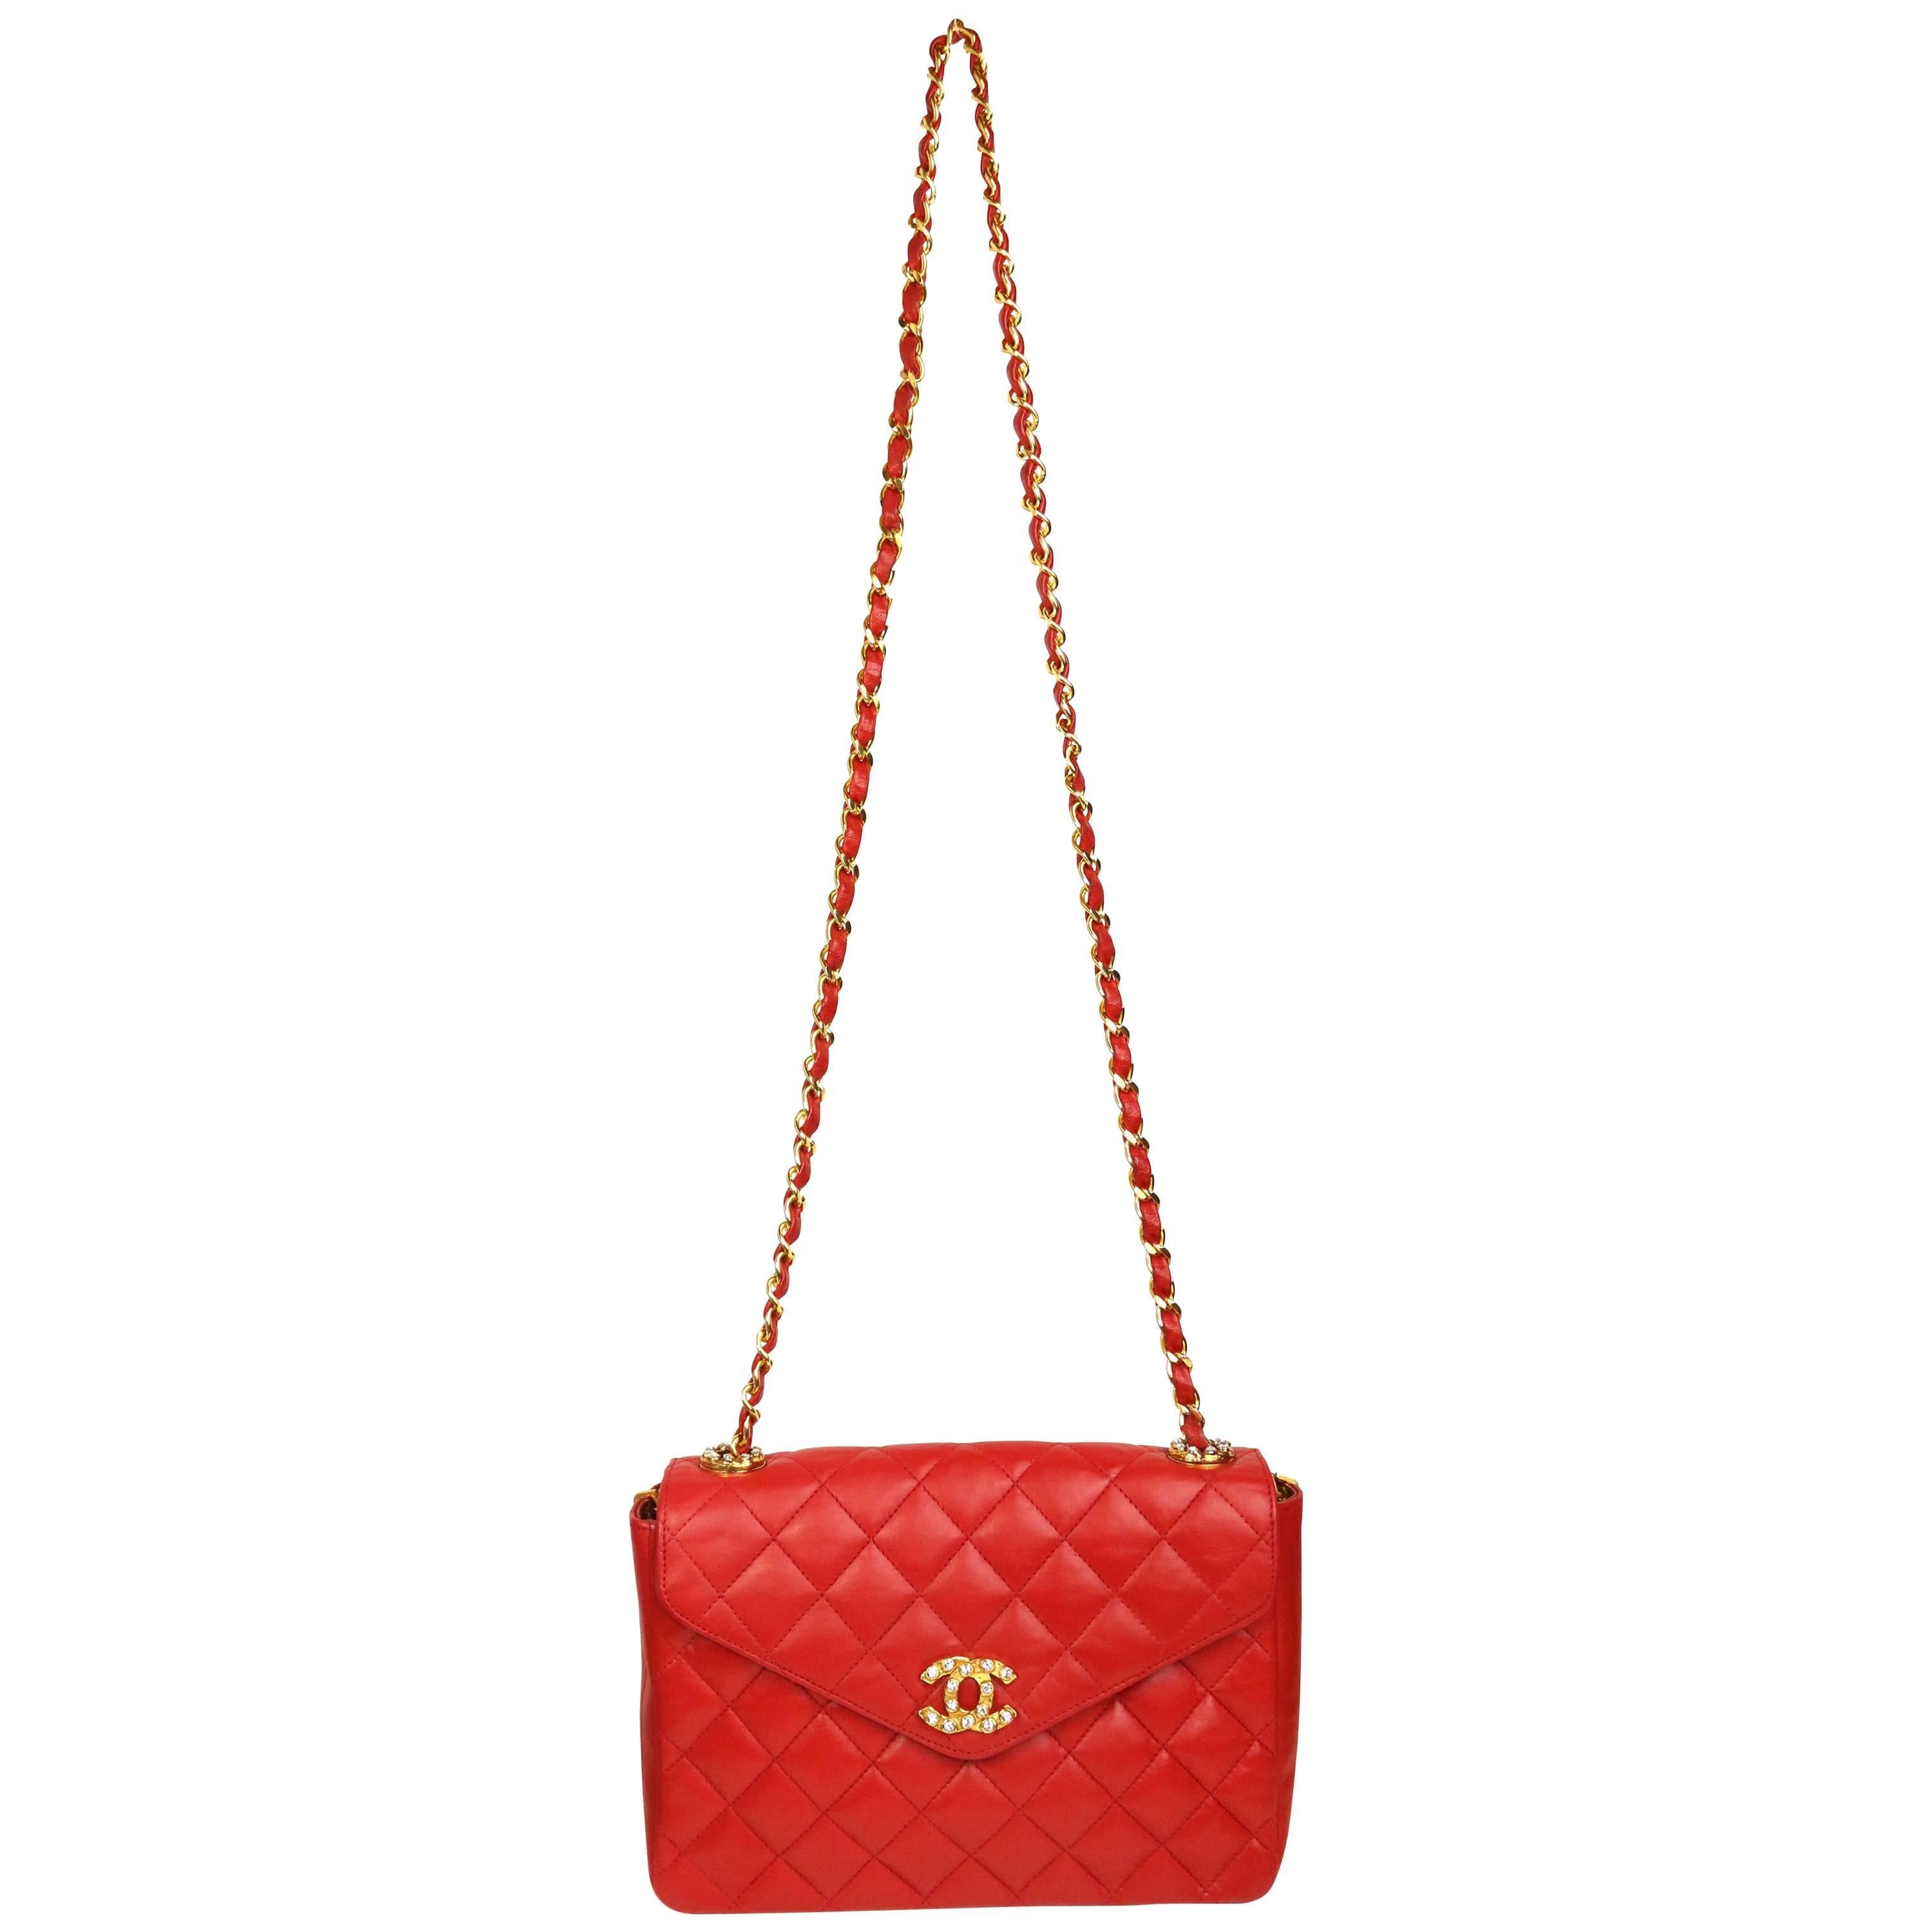 Chanel Classic Red Quilted Lambskin Leather CC Rhinestones Flap